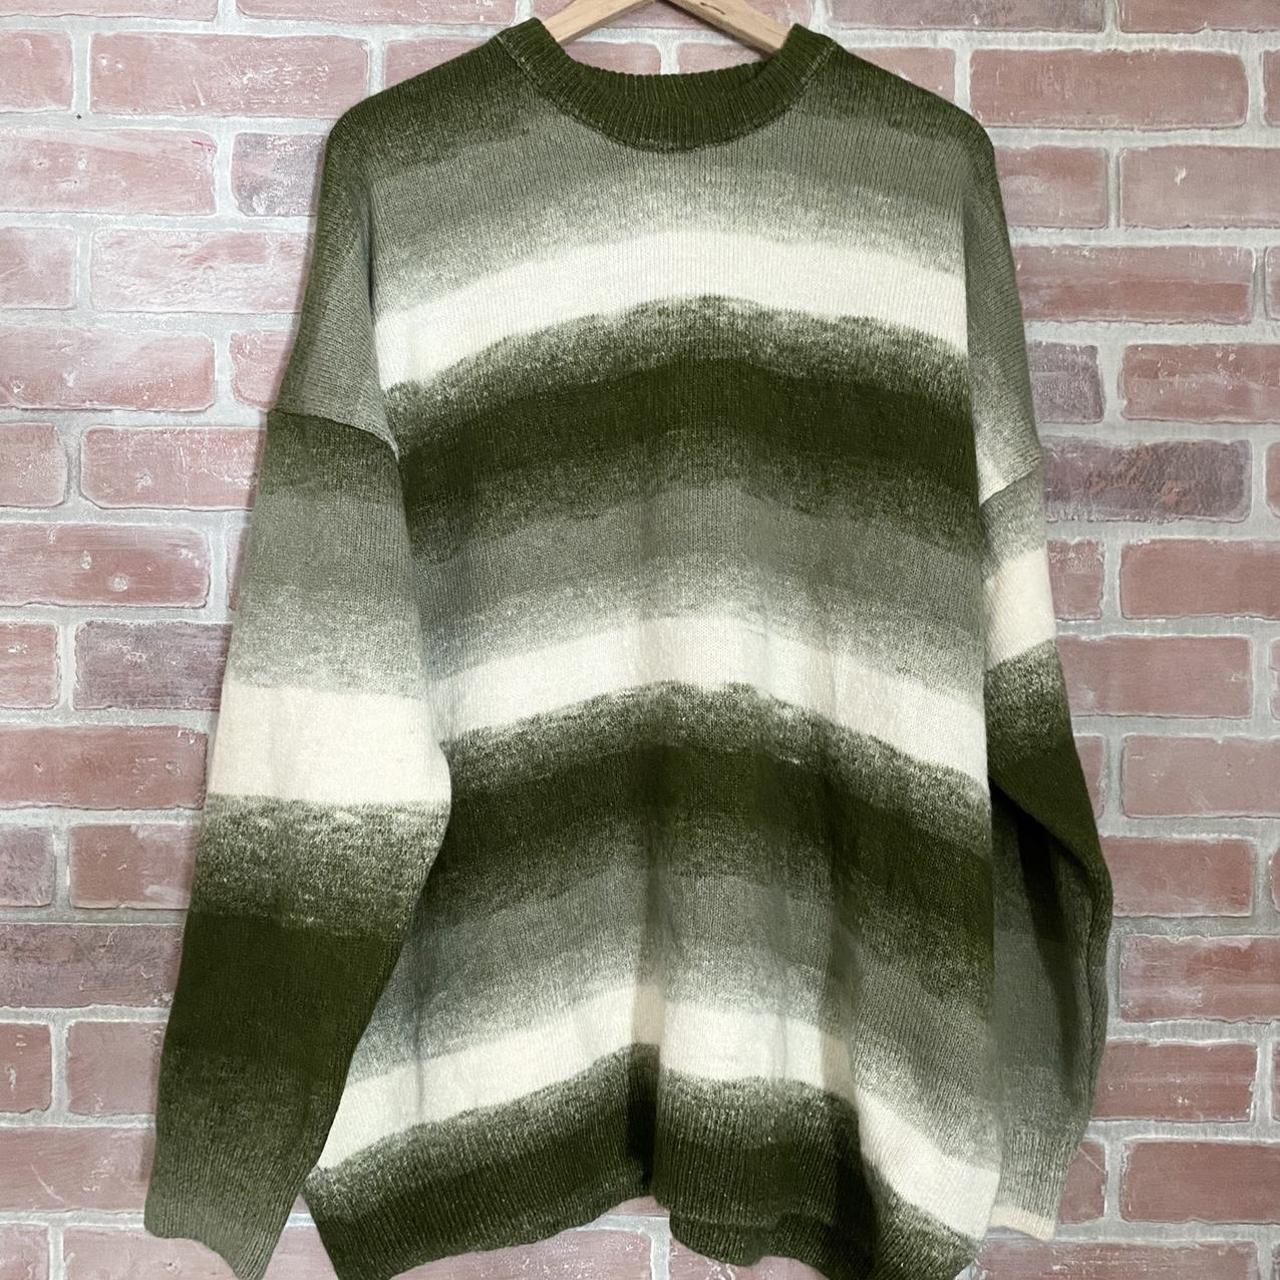 Boohoo Men's Green and White Jumper